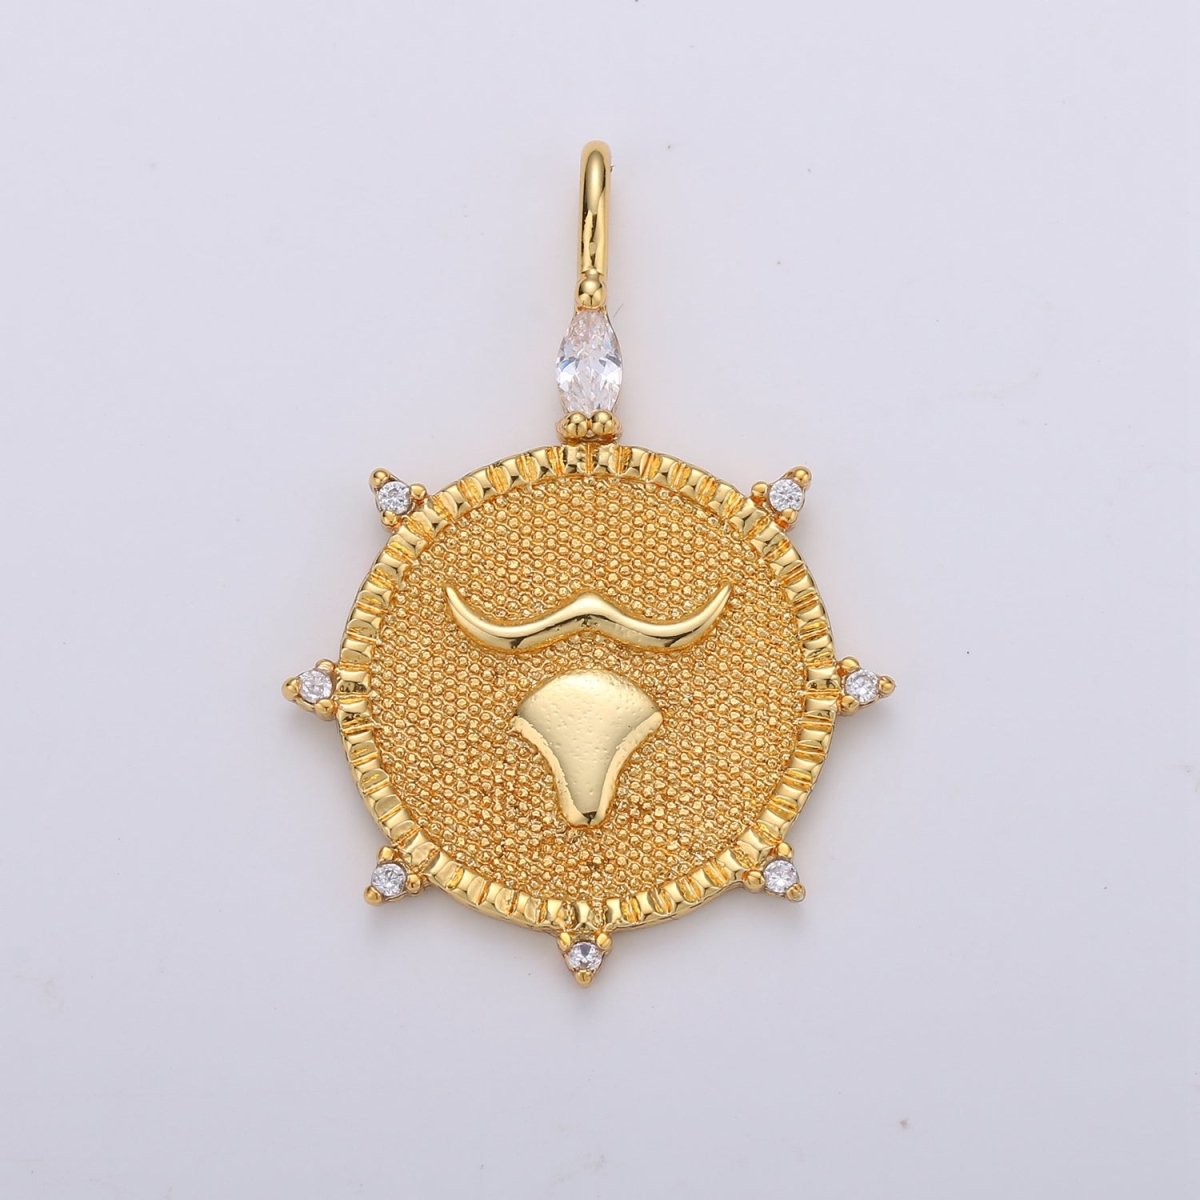 24k Gold Filled Zodiac Charms, Astrology Charms, Zodiac Necklace Charms, 12 Zodiac Charms for Jewelry Making Supply A-495-A-506 - DLUXCA